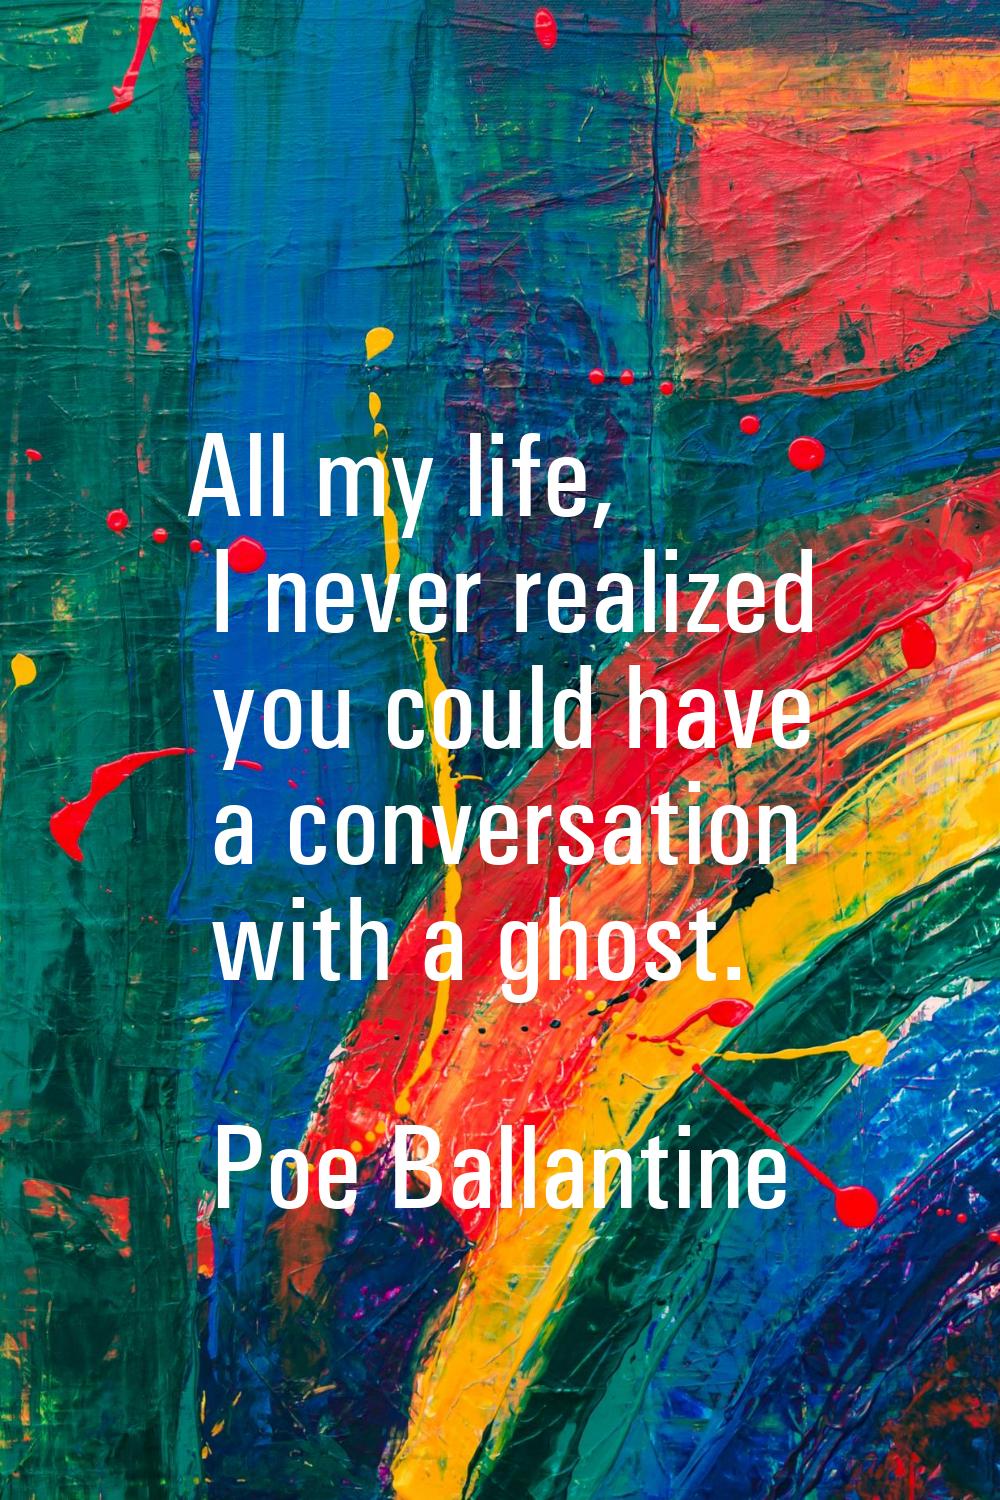 All my life, I never realized you could have a conversation with a ghost.